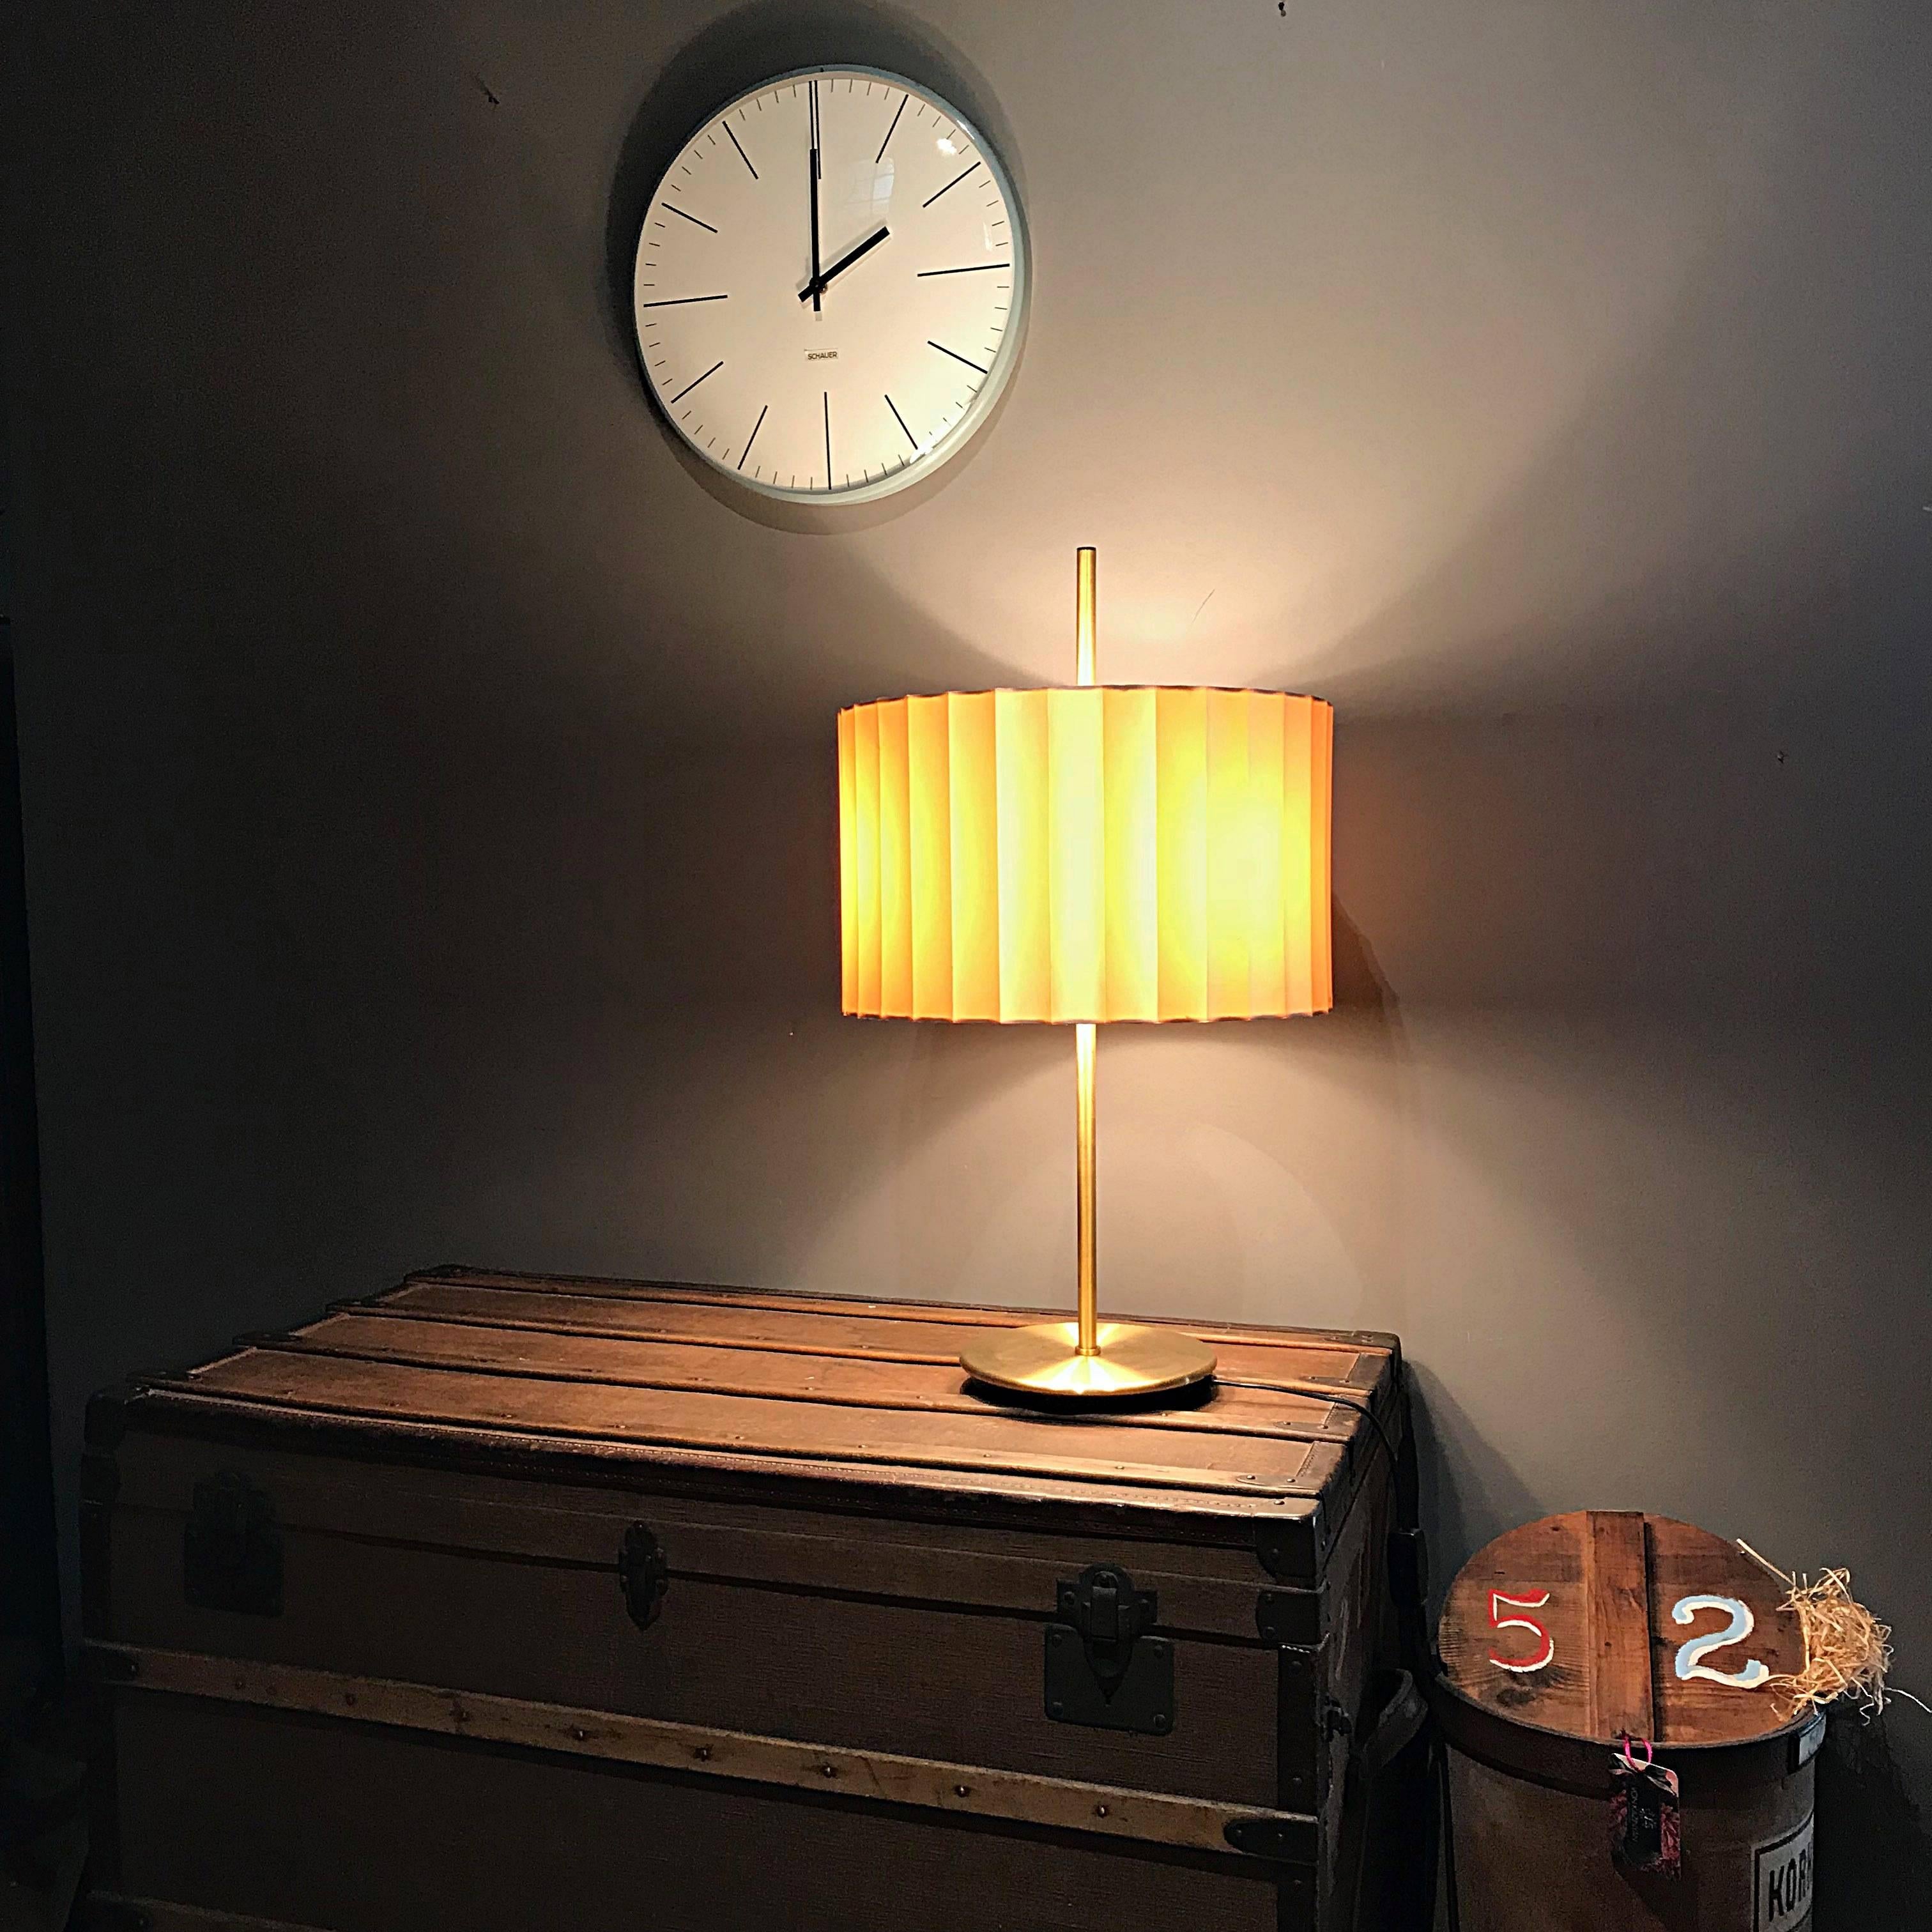 Simple and elegant midcentury table lamp manufactured by Staff Leuchten in Germany. The lamp is made of brass with heavy cast-iron base. The folded silk lampshade provides a smooth large-area light. The lamp is in excellent condition with nice